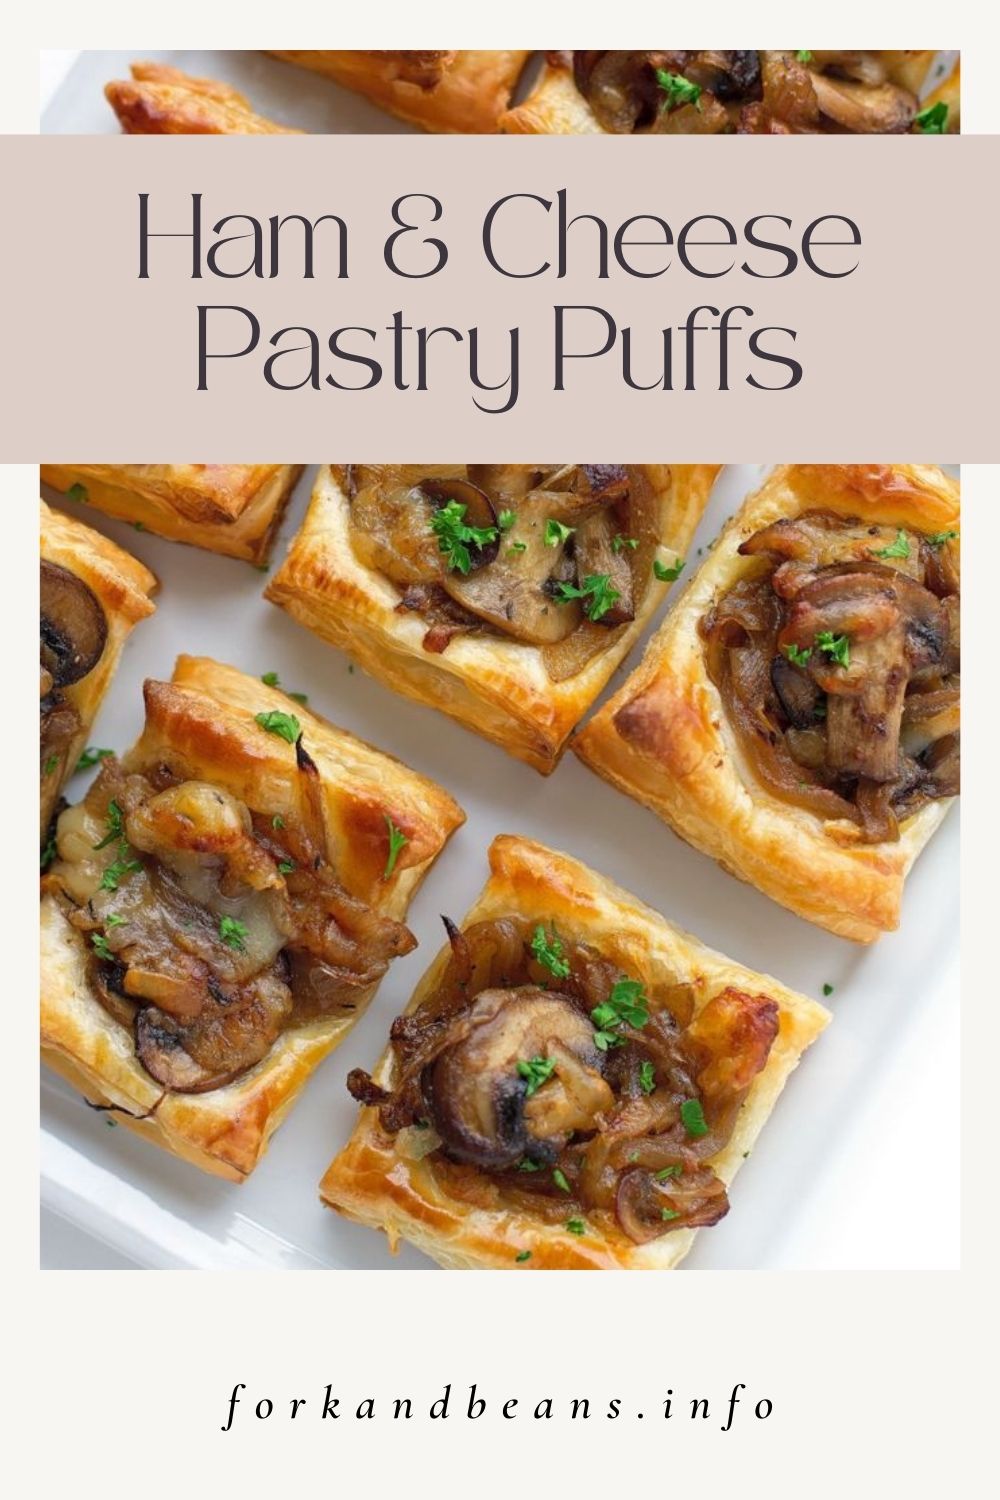 Bites with Gruyere, mushrooms, and caramelized onions